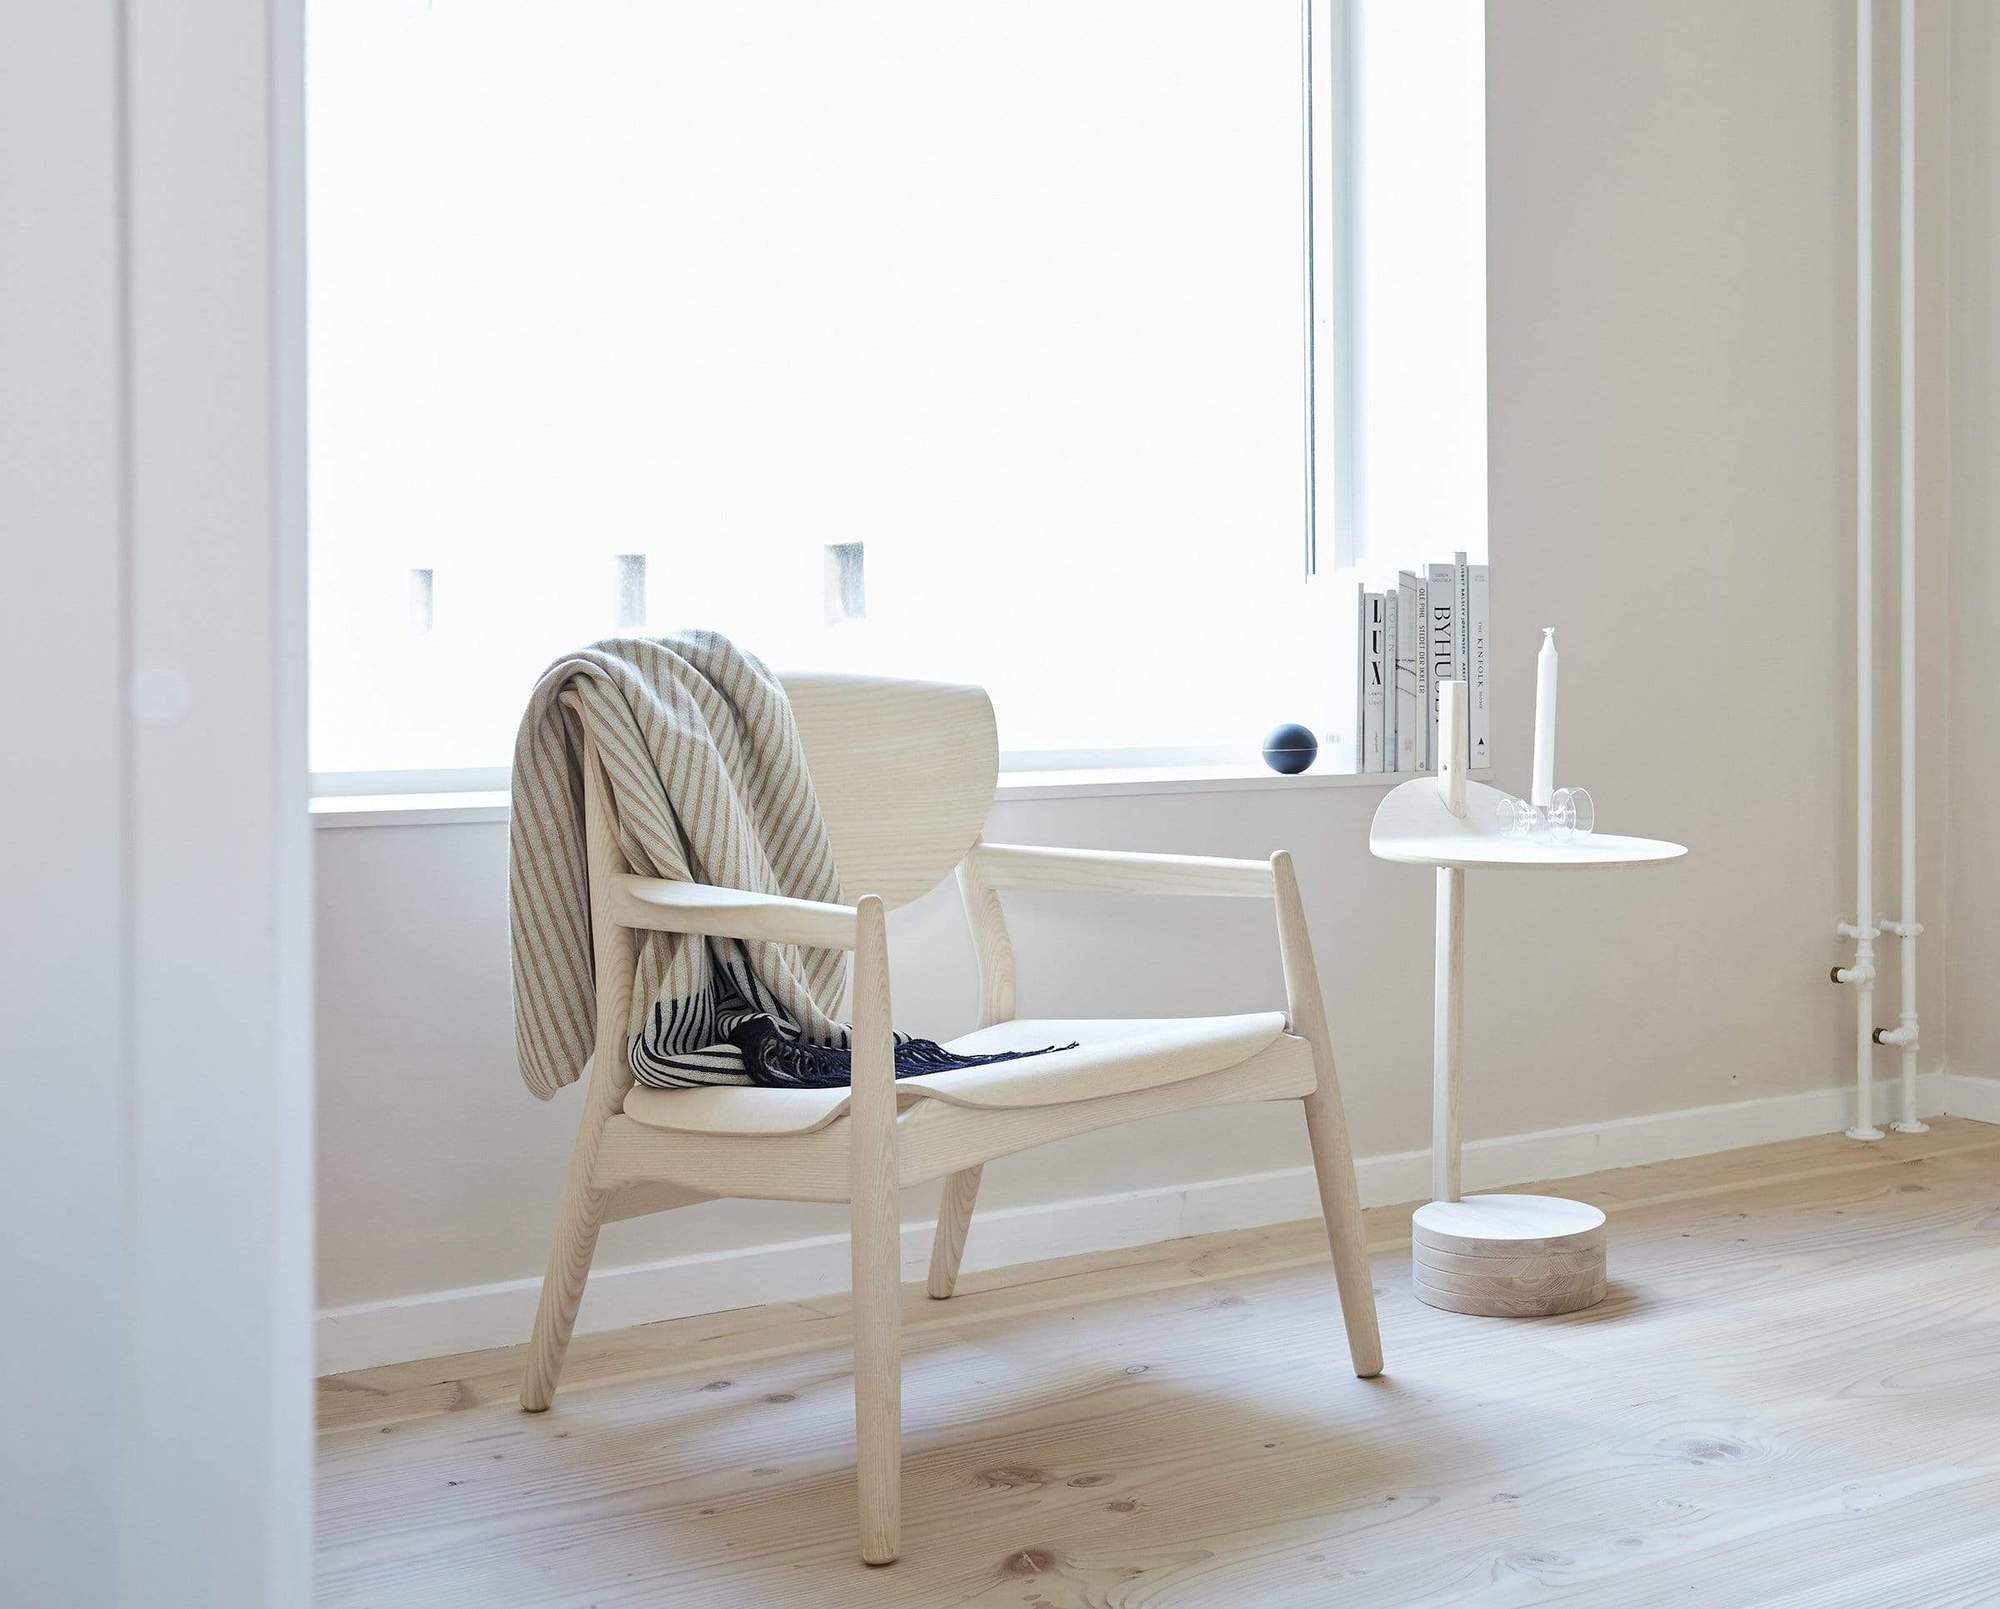 Form & Refine Furniture Shows off the Excellence of Danish Design